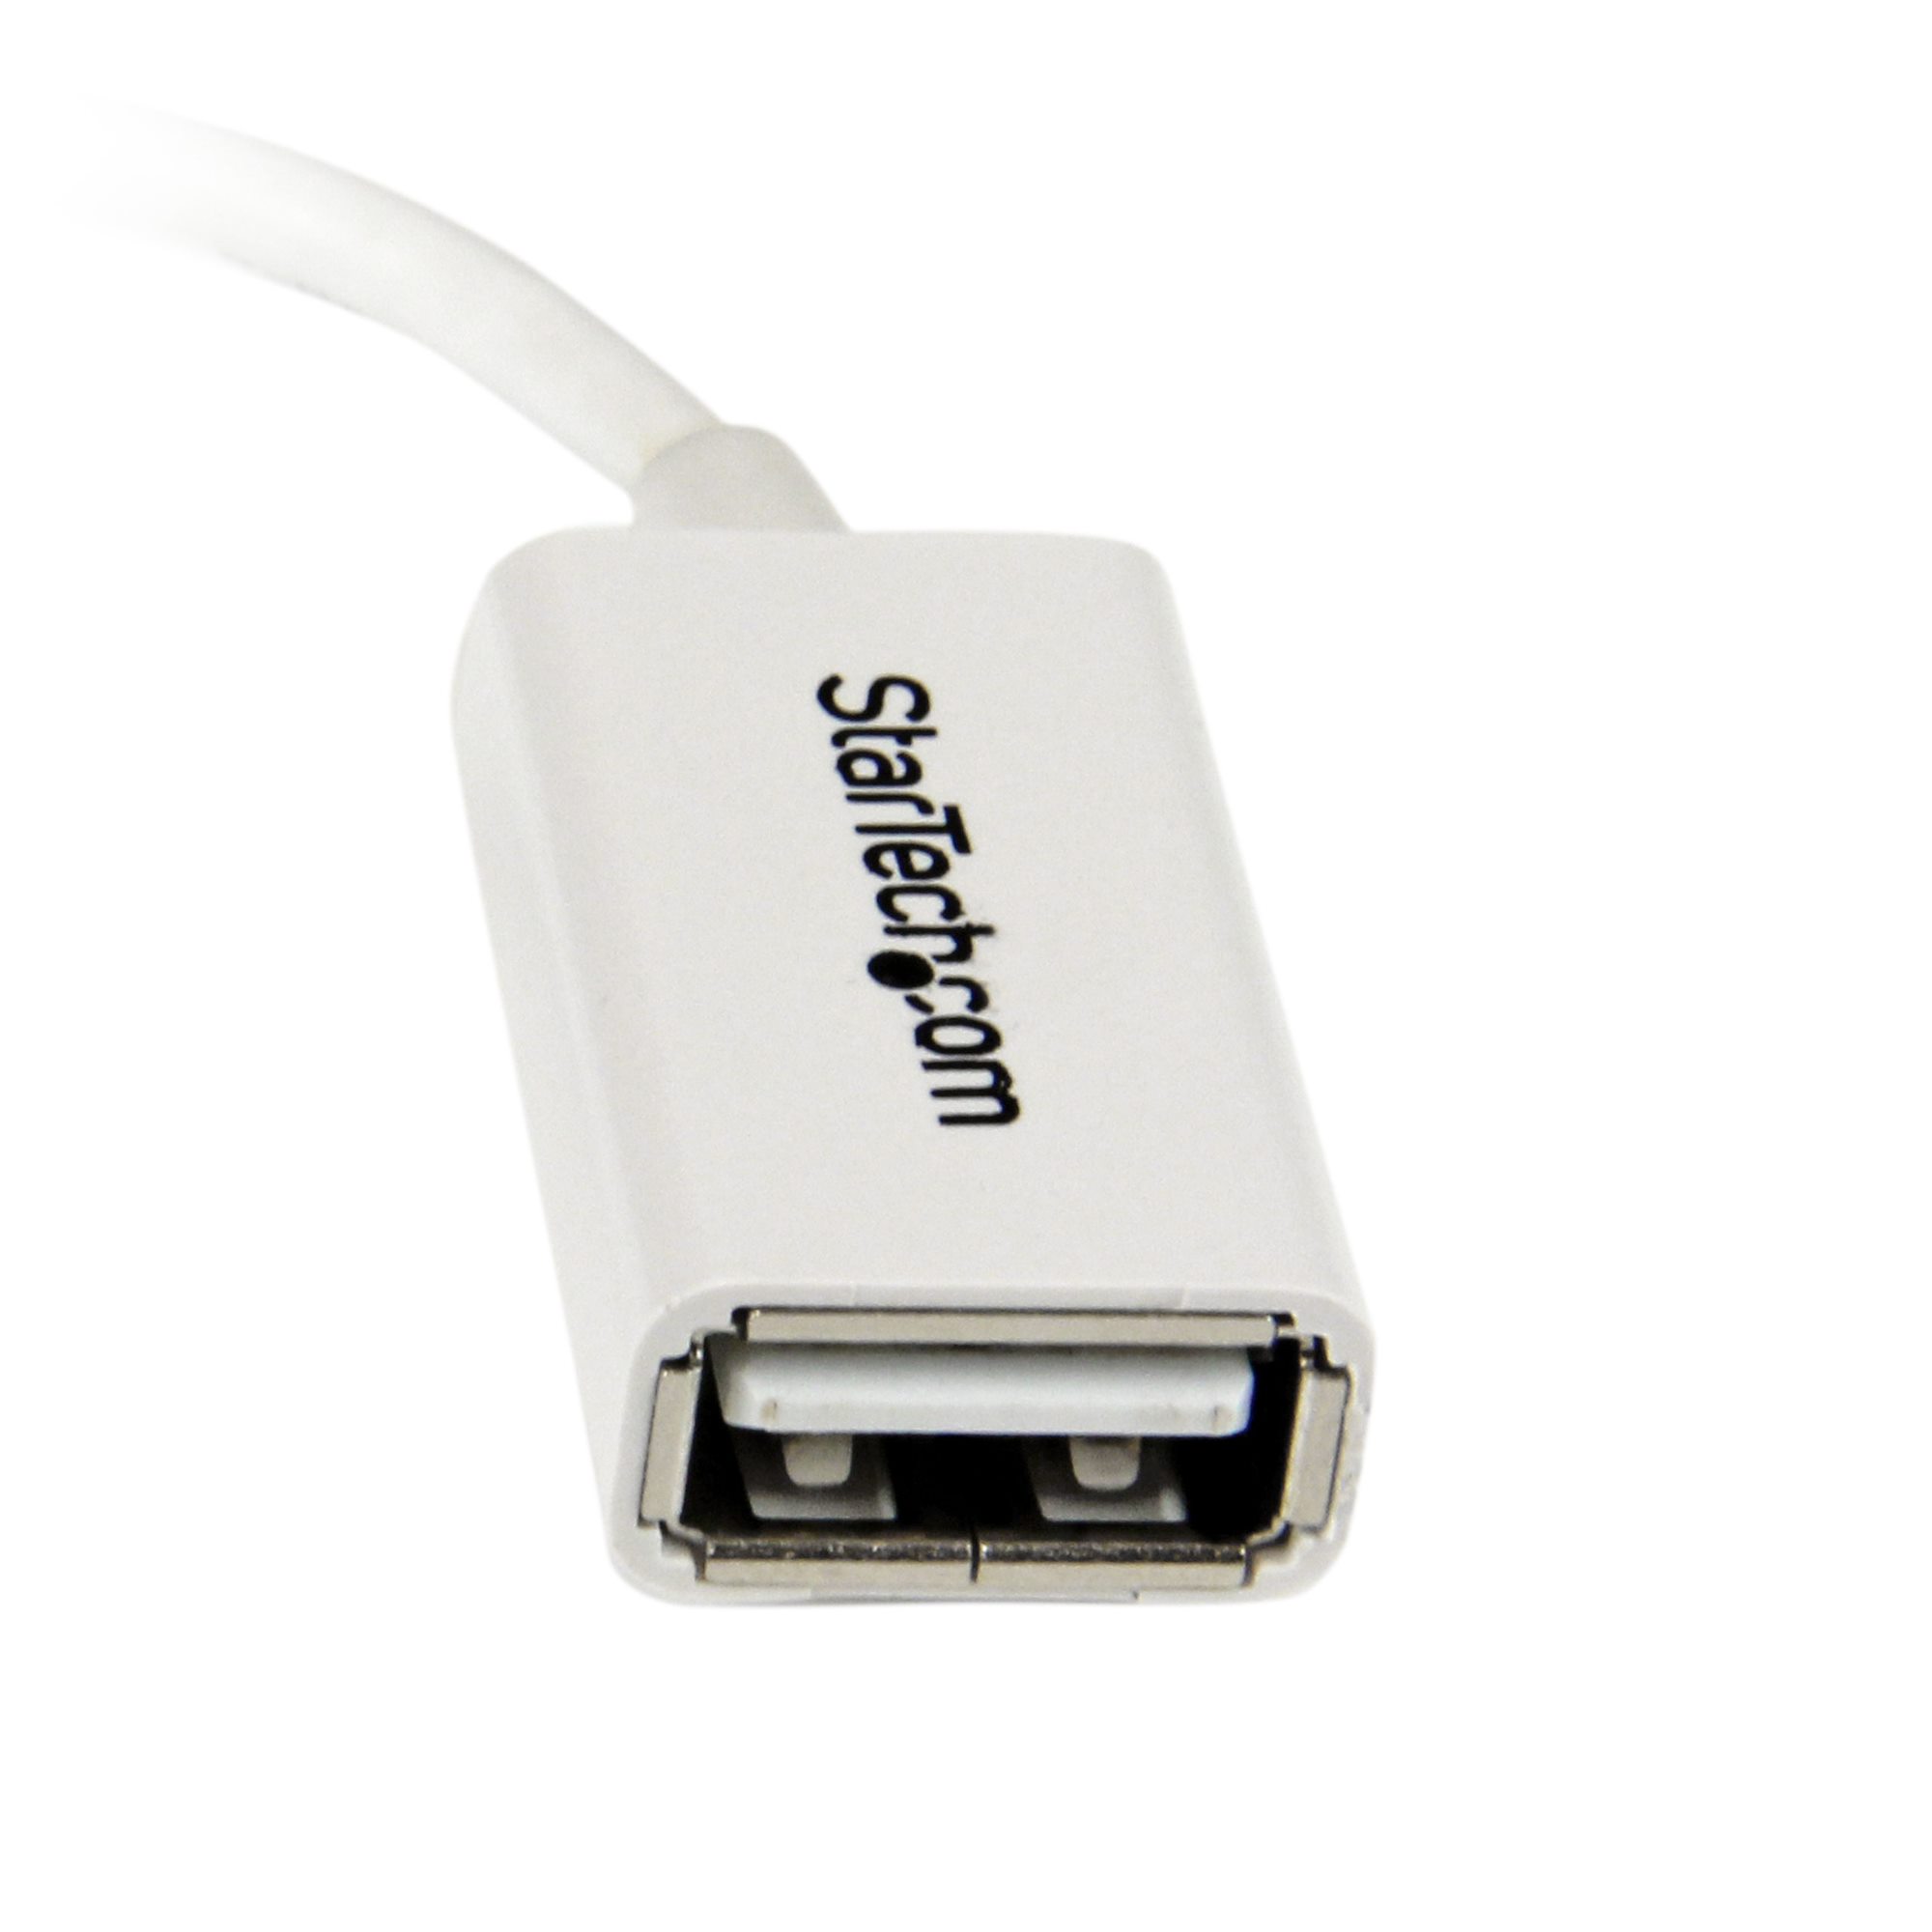 Wholesale iOS OTG USB Adapter, Male to Female USB OTG Extension